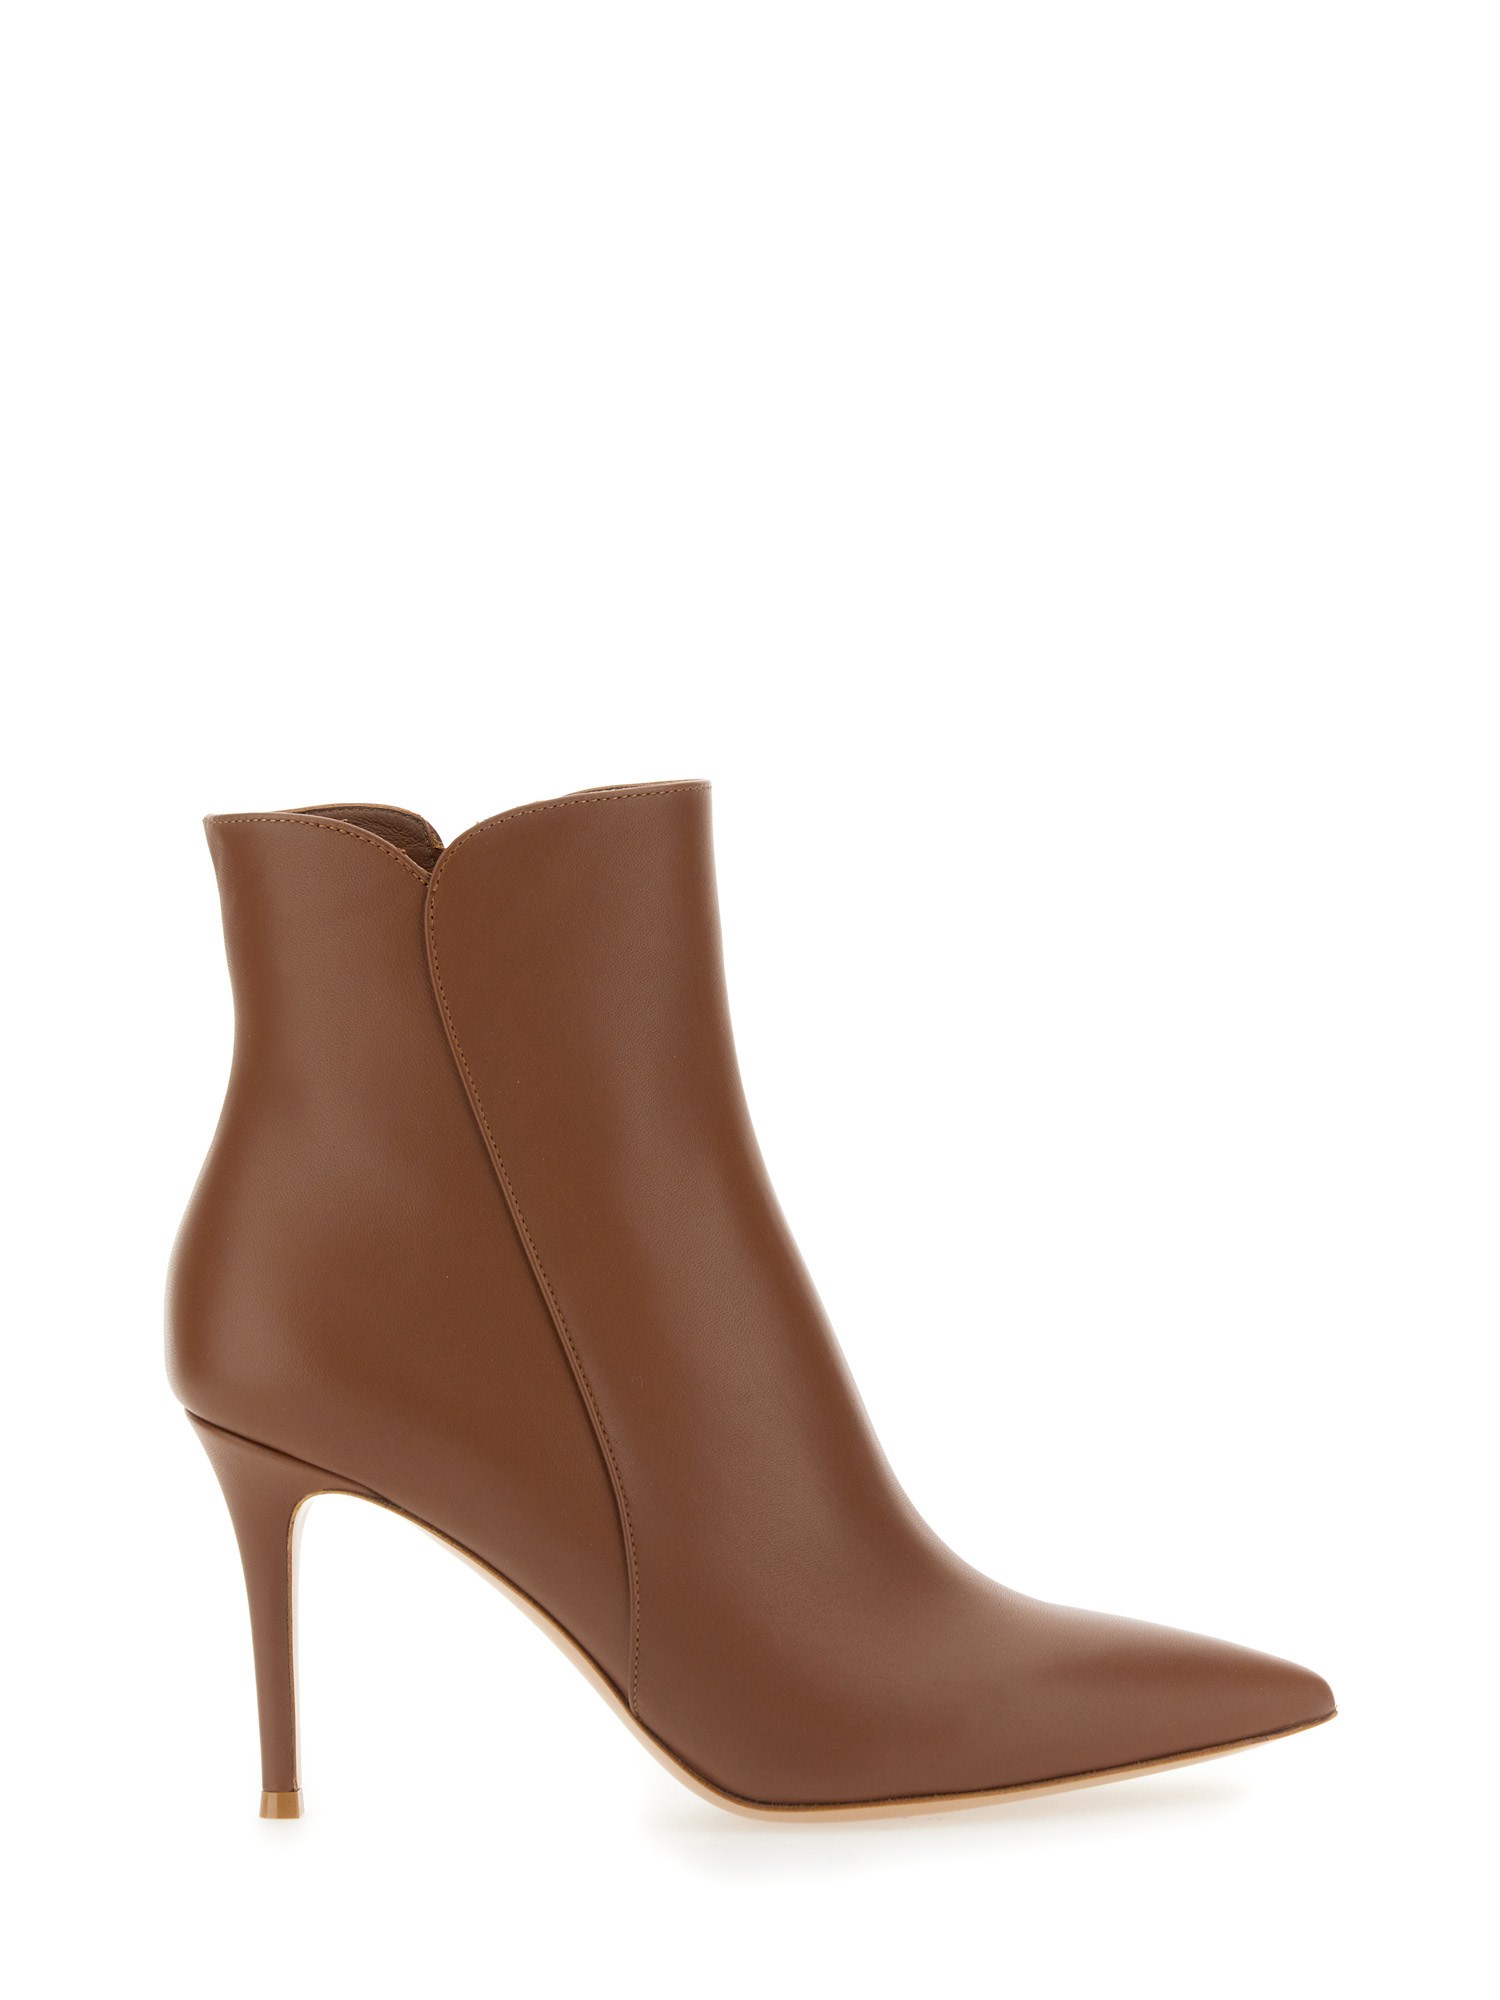 gianvito rossi levy 85 boot